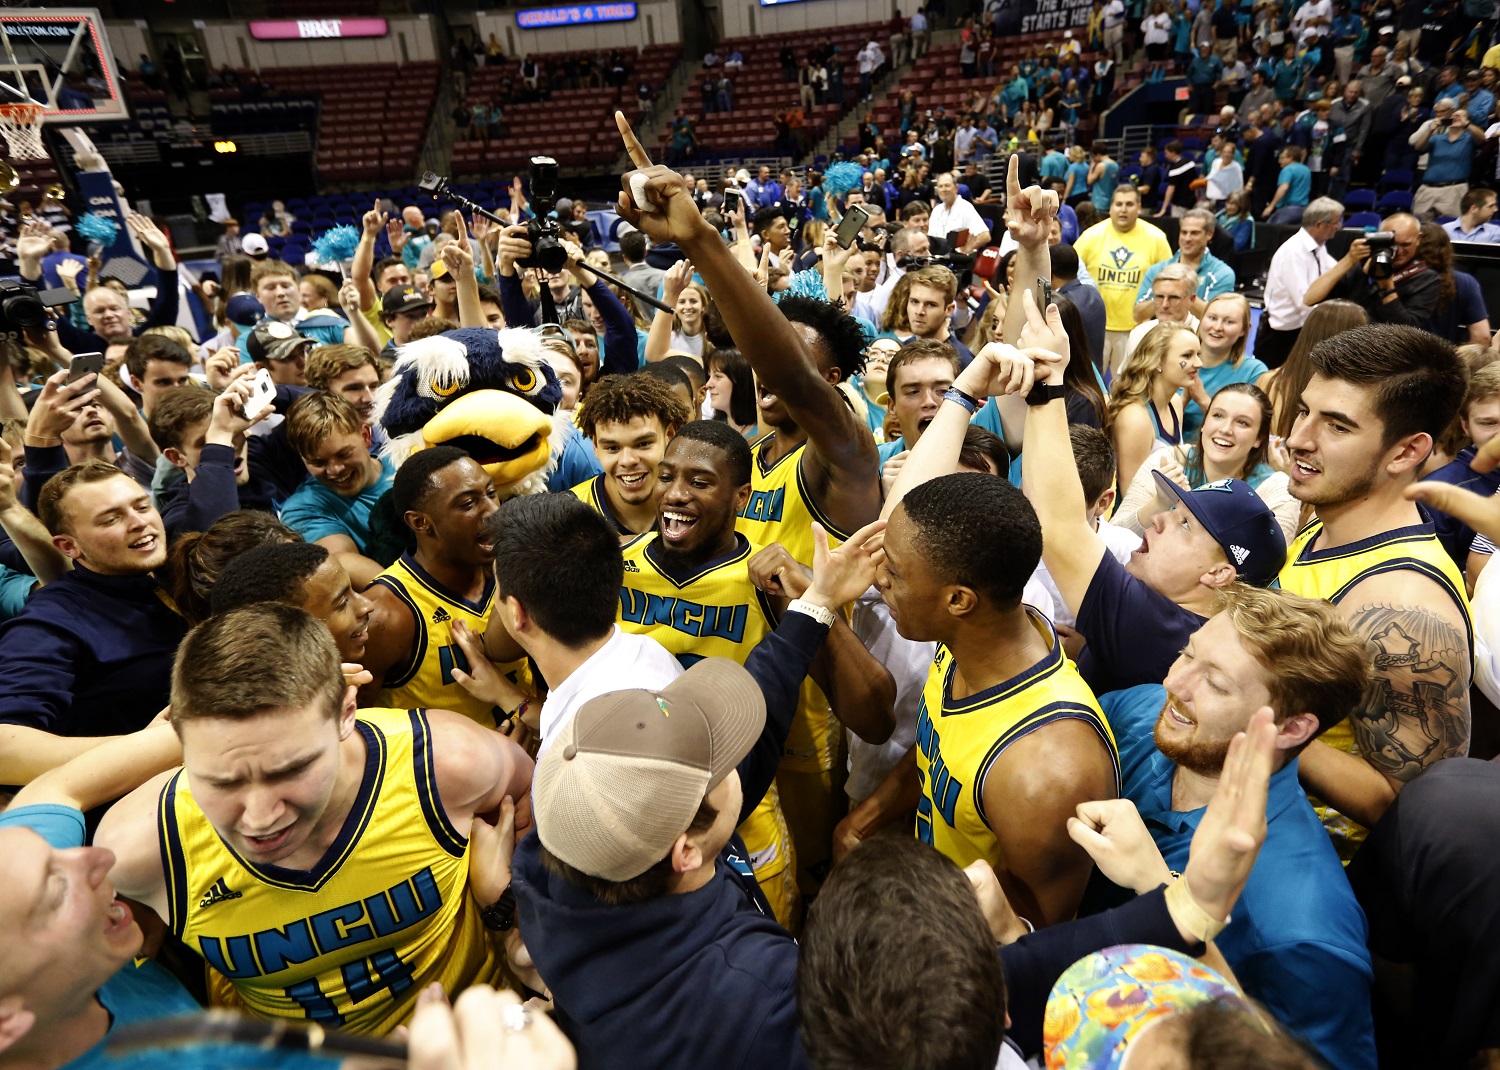 UNC Wilmington players, coaches and fans storm the court after defeating College of Charleston 78-69 at the end of an NCAA college championship basketball game in the Colonial Athletic Association tournament at the North Charleston Coliseum in North Charleston, S.C., Monday, March 6, 2017. (AP Photo/Mic Smith)